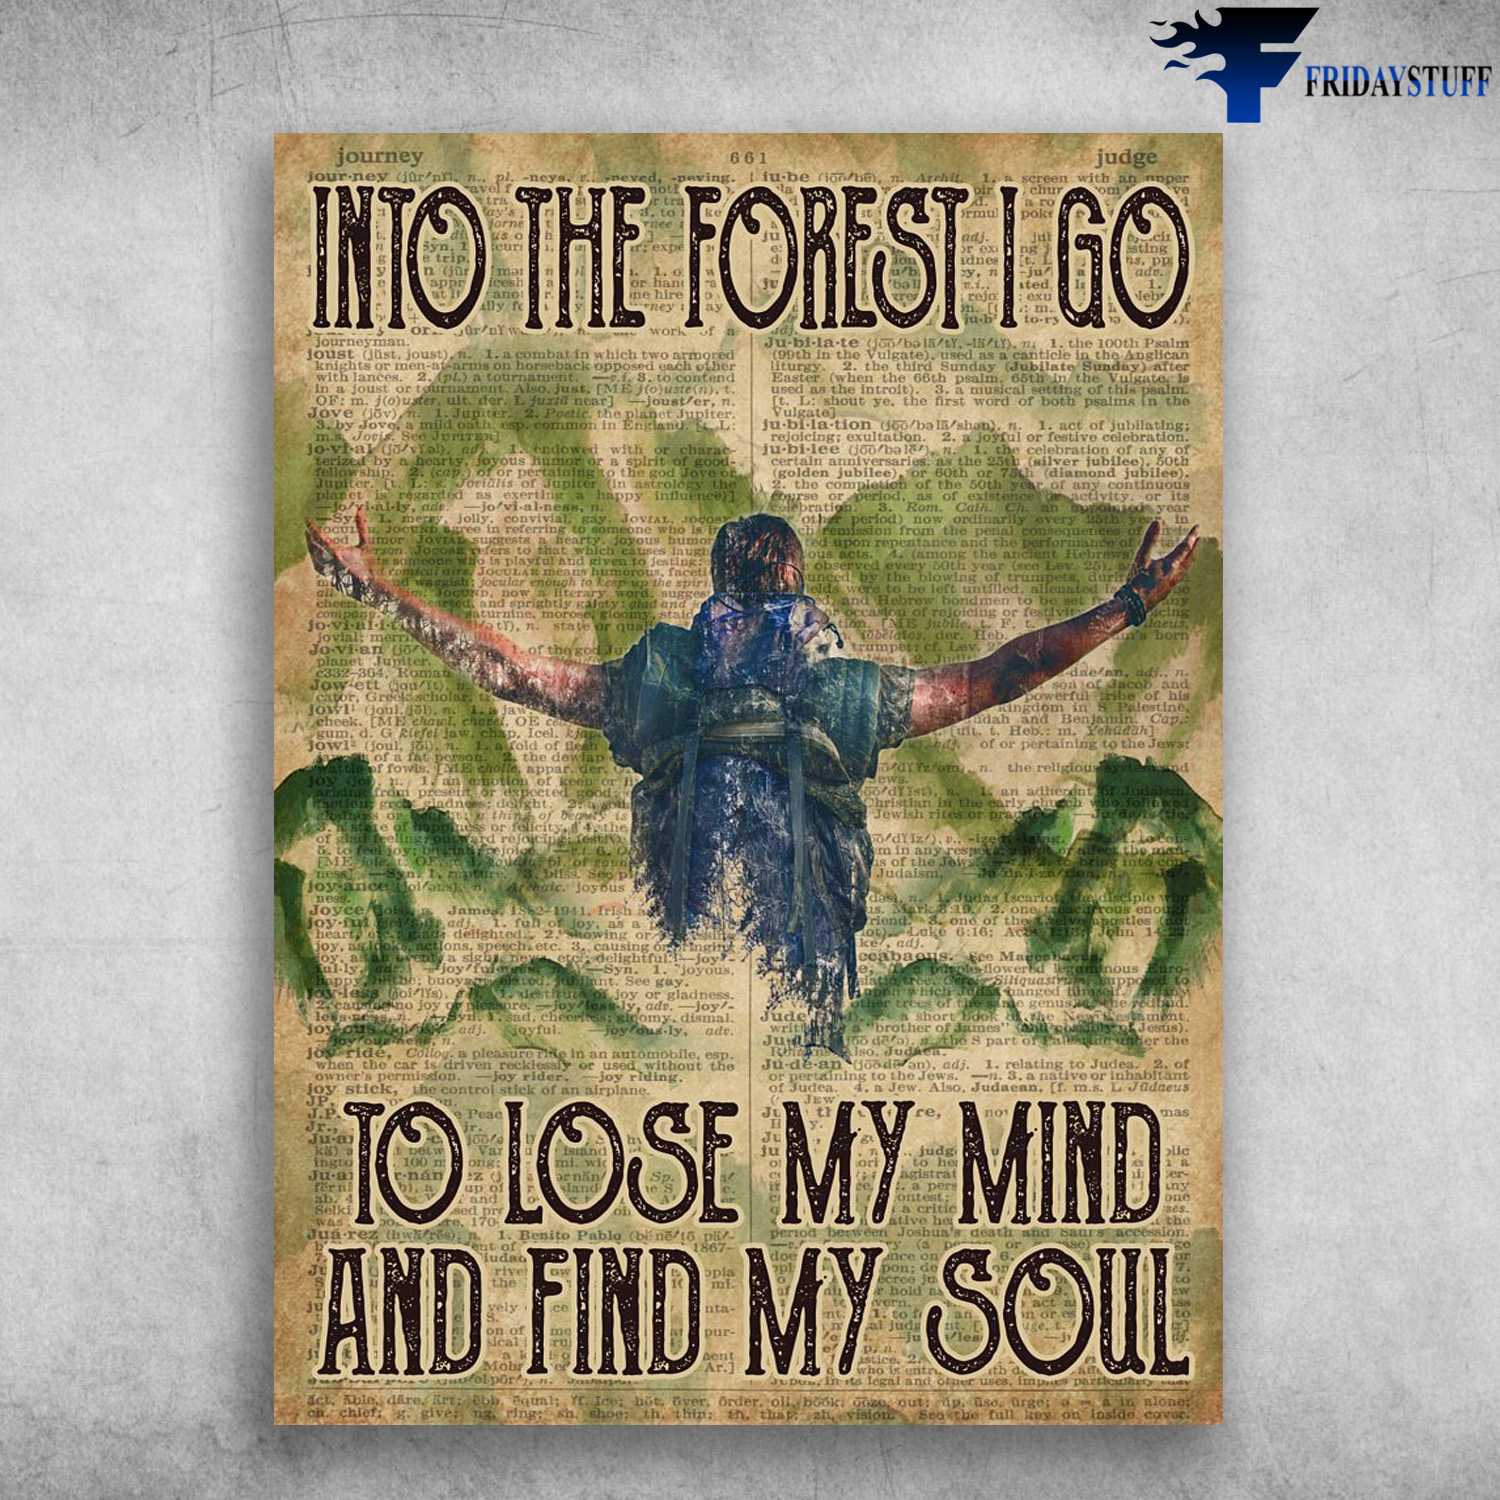 Mountain Climbing, Climbing Poster, Into The Forest, I Go To Lose My Mind, And Find My Soul